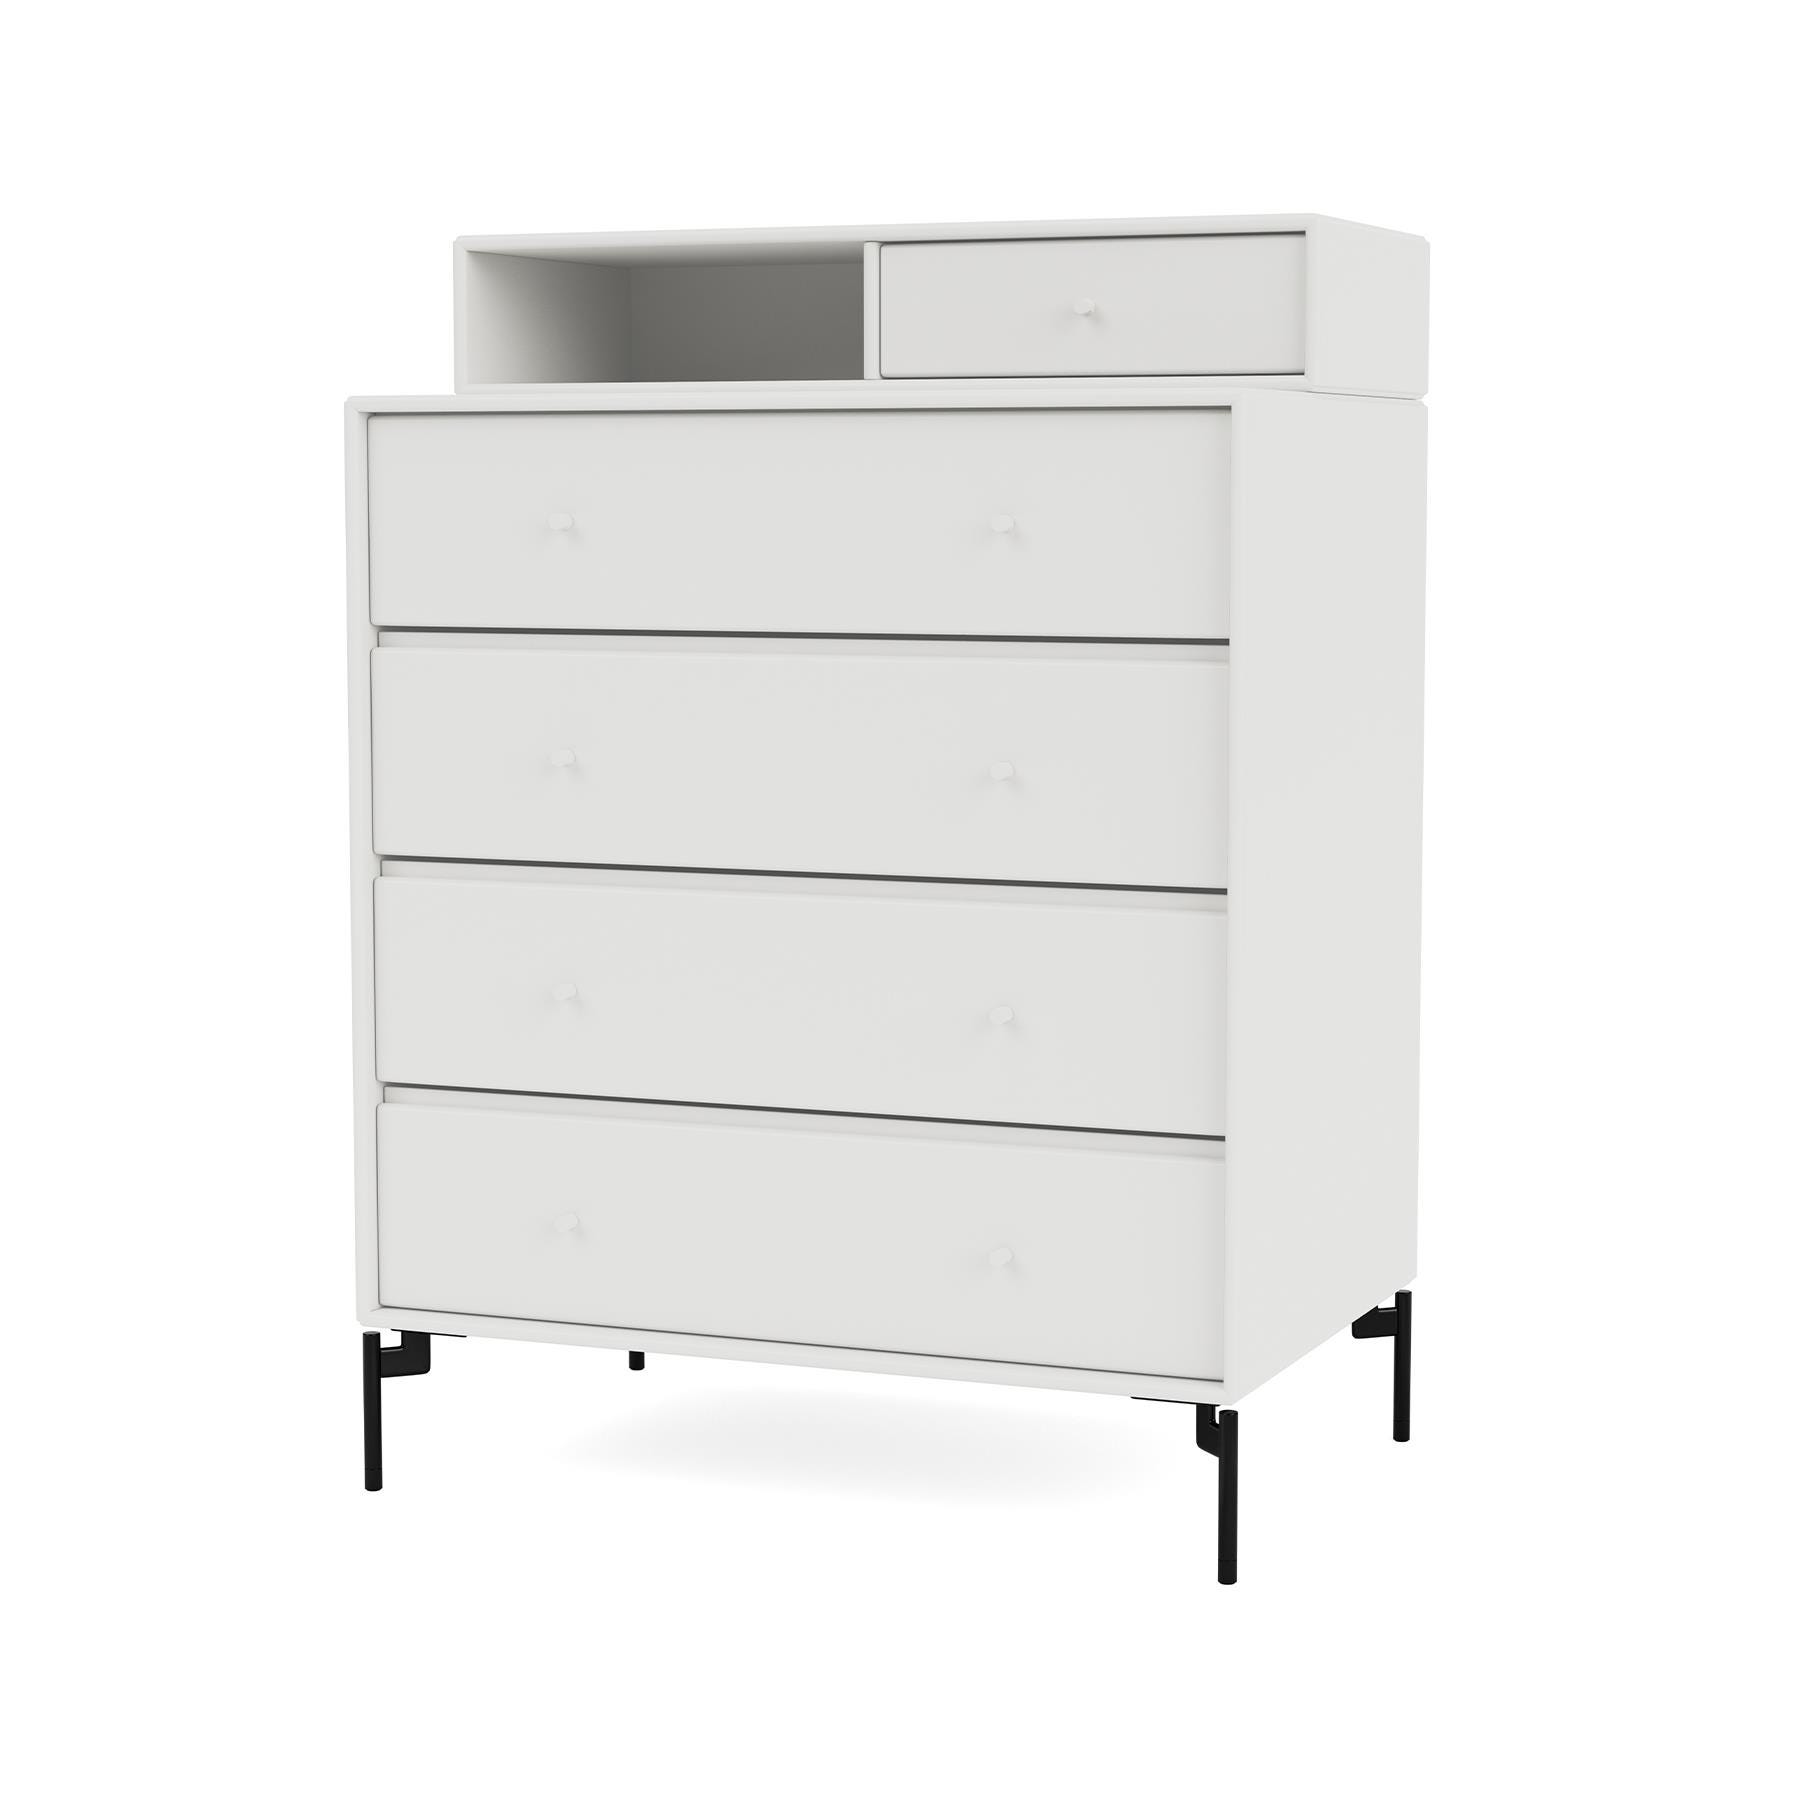 Montana Keep Chest Of Drawers White Black Legs White Designer Furniture From Holloways Of Ludlow